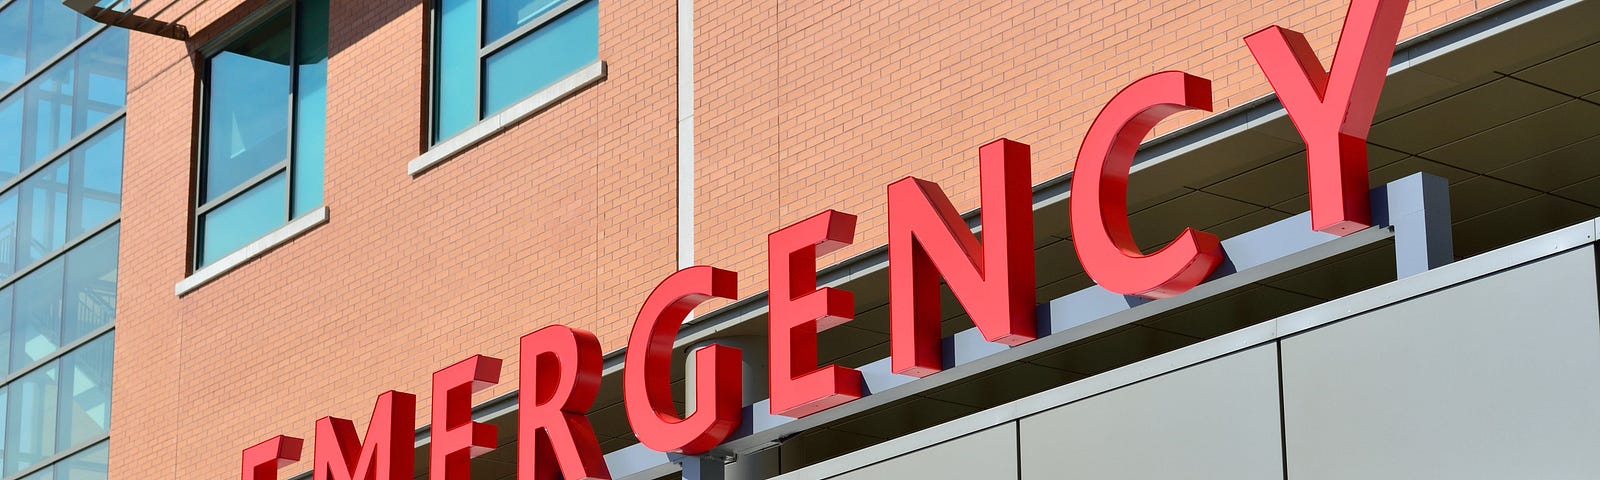 An emergency room outdoor signage with the word “EMERGENCY” in red capital letters